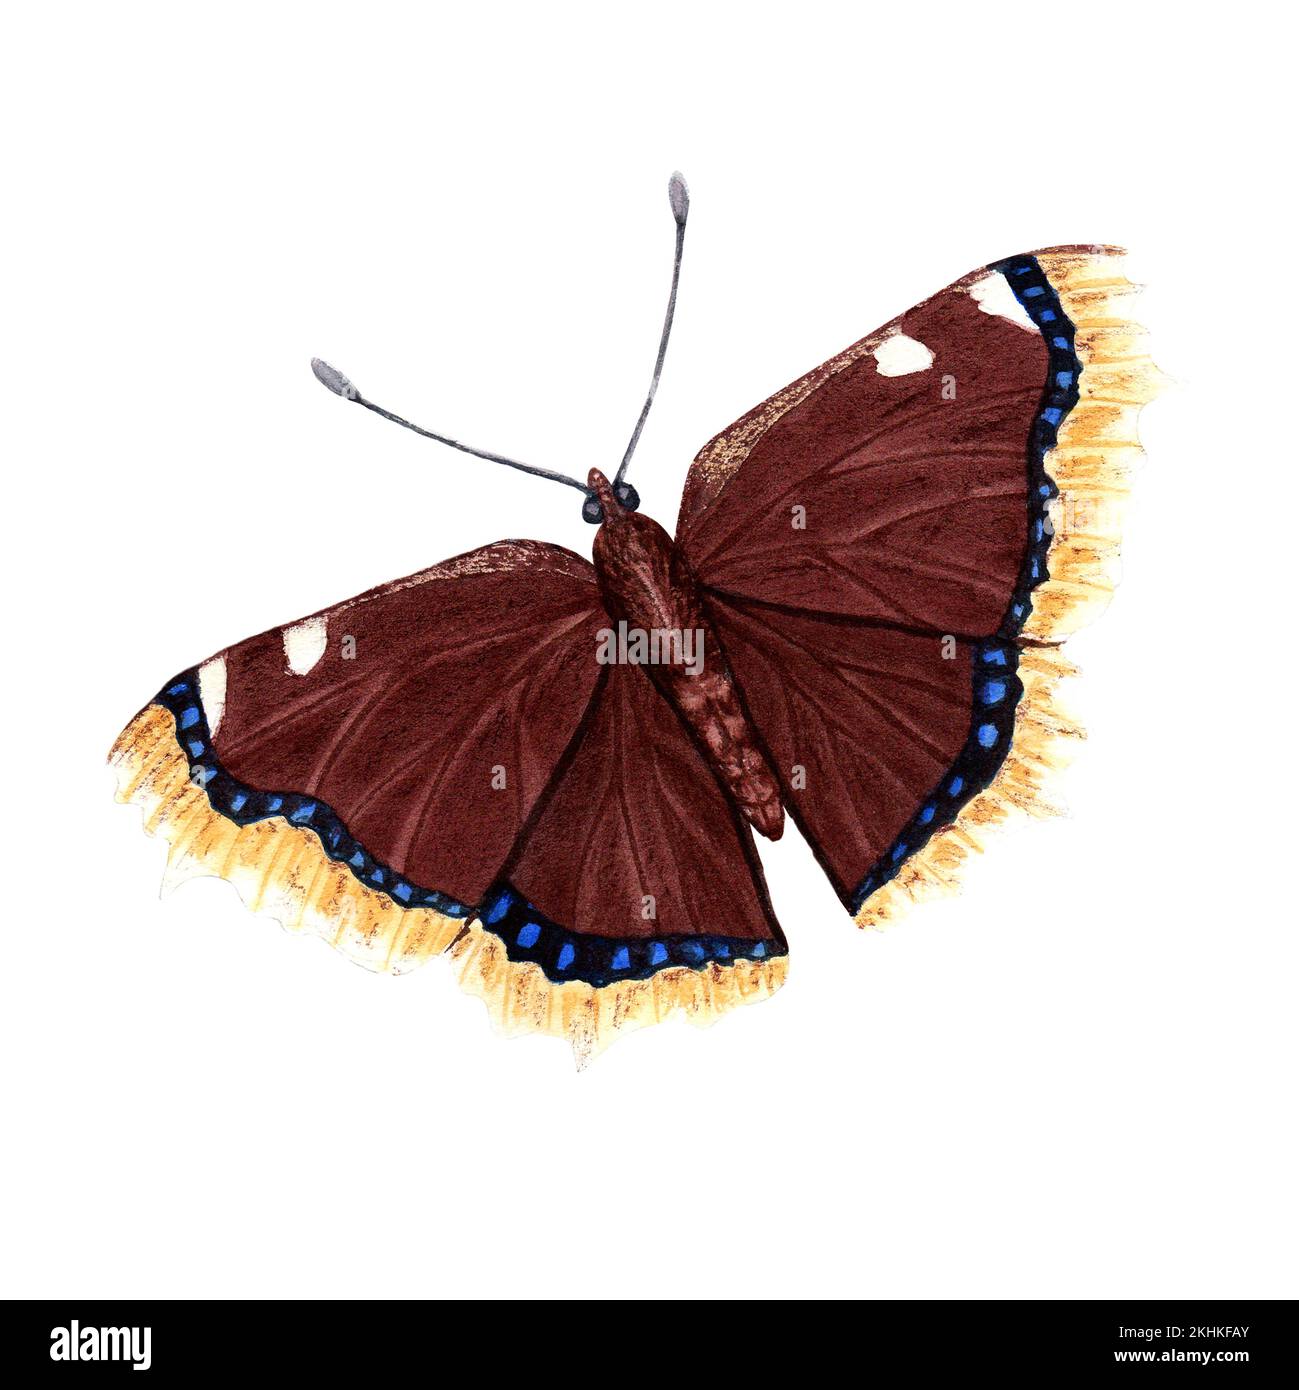 Mourning cloak butterfly hand drawn watercolor illustration isolated on white background for card, invitation, clip art Stock Photo